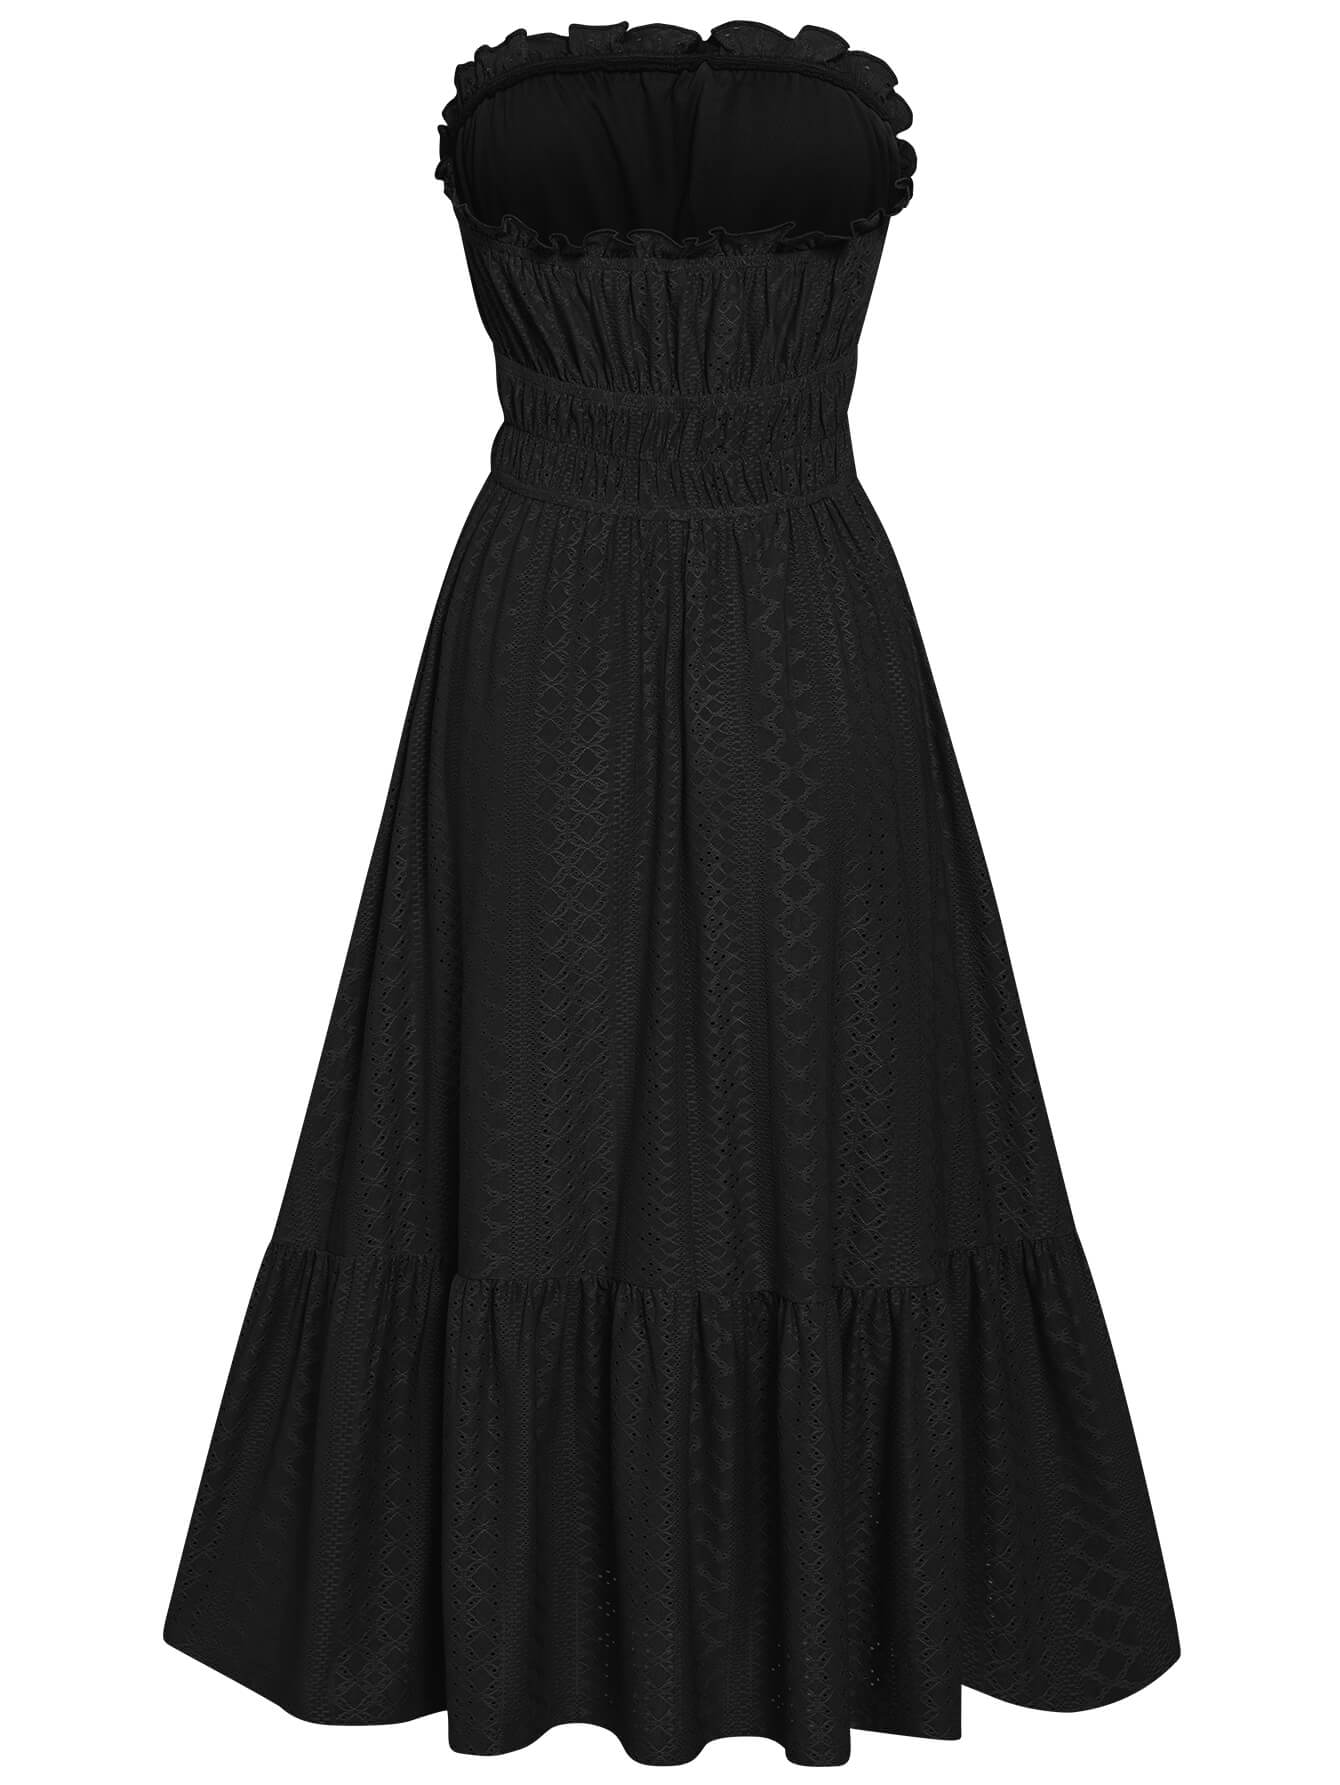 THE NEW YOU STRAPLESS LACE MIDI DRESS - BLACK